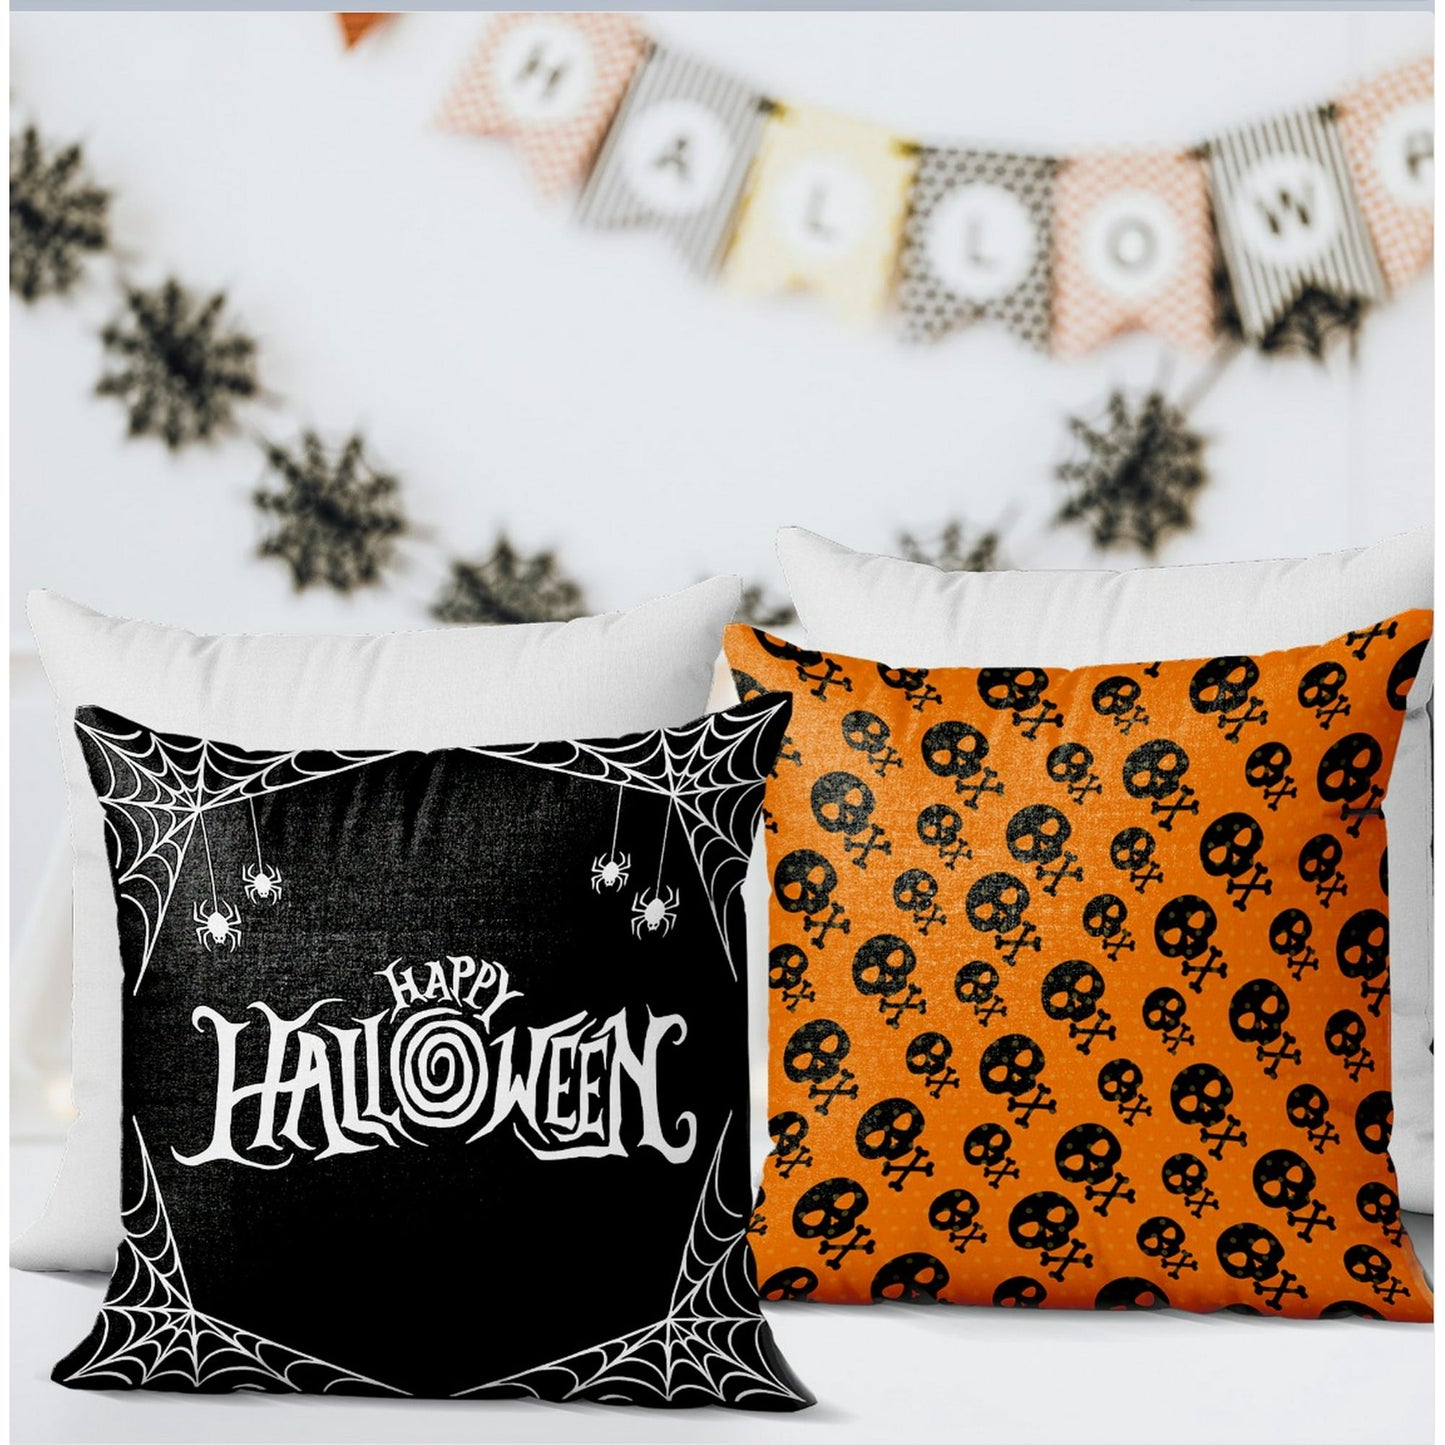 Halloween throw pillow with spider web design